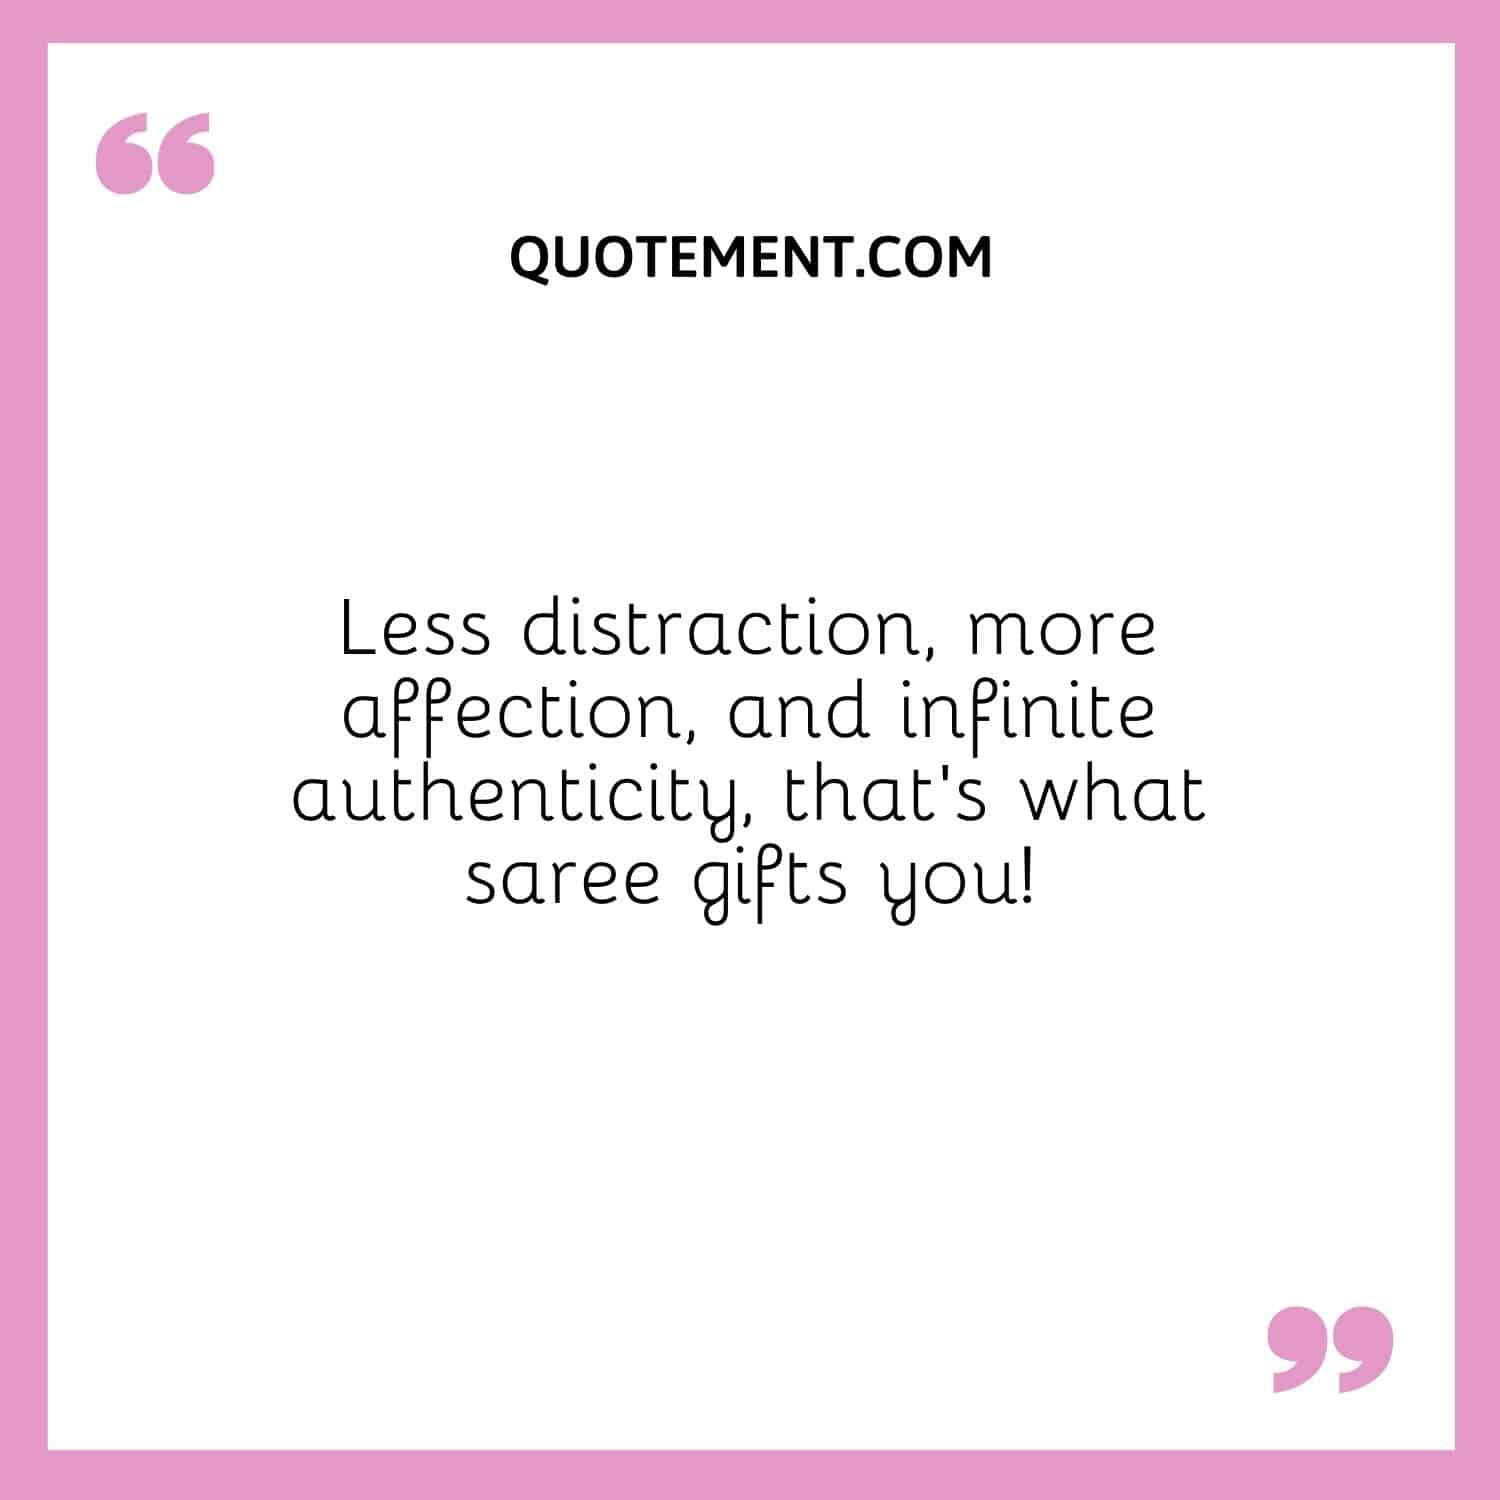 Less distraction, more affection, and infinite authenticity, that’s what saree gifts you!